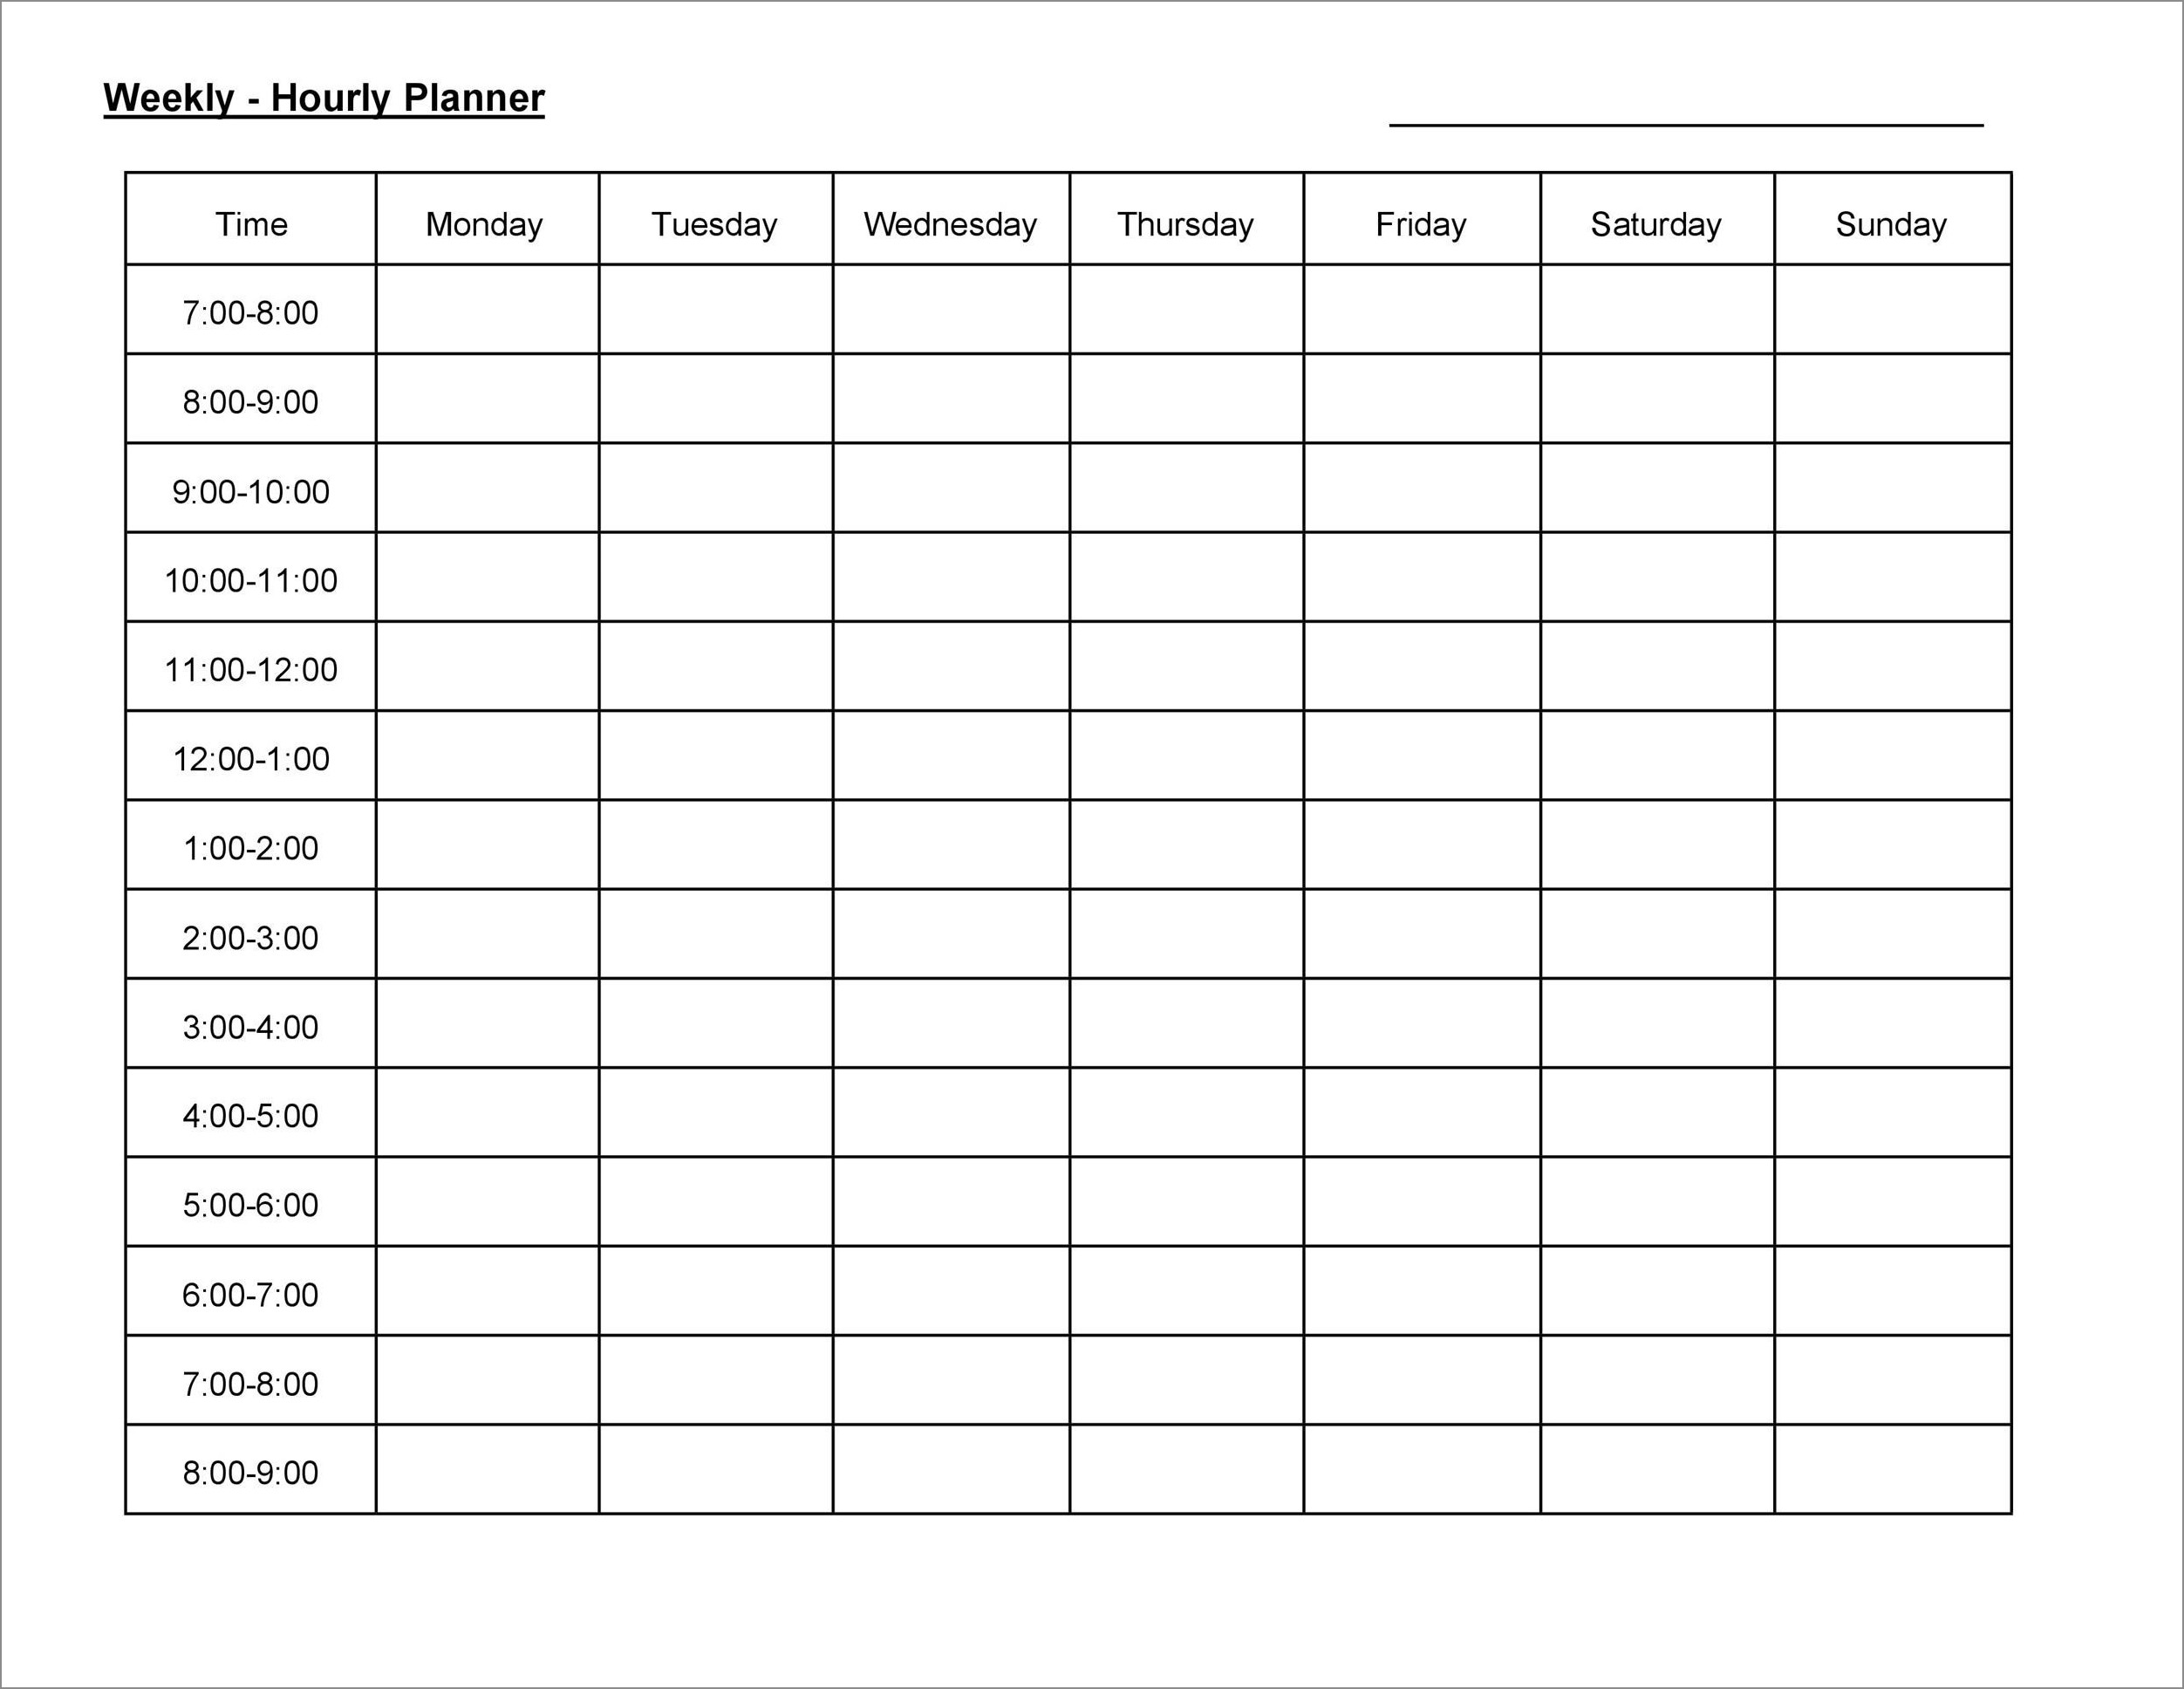 example of weekly schedule template with hours